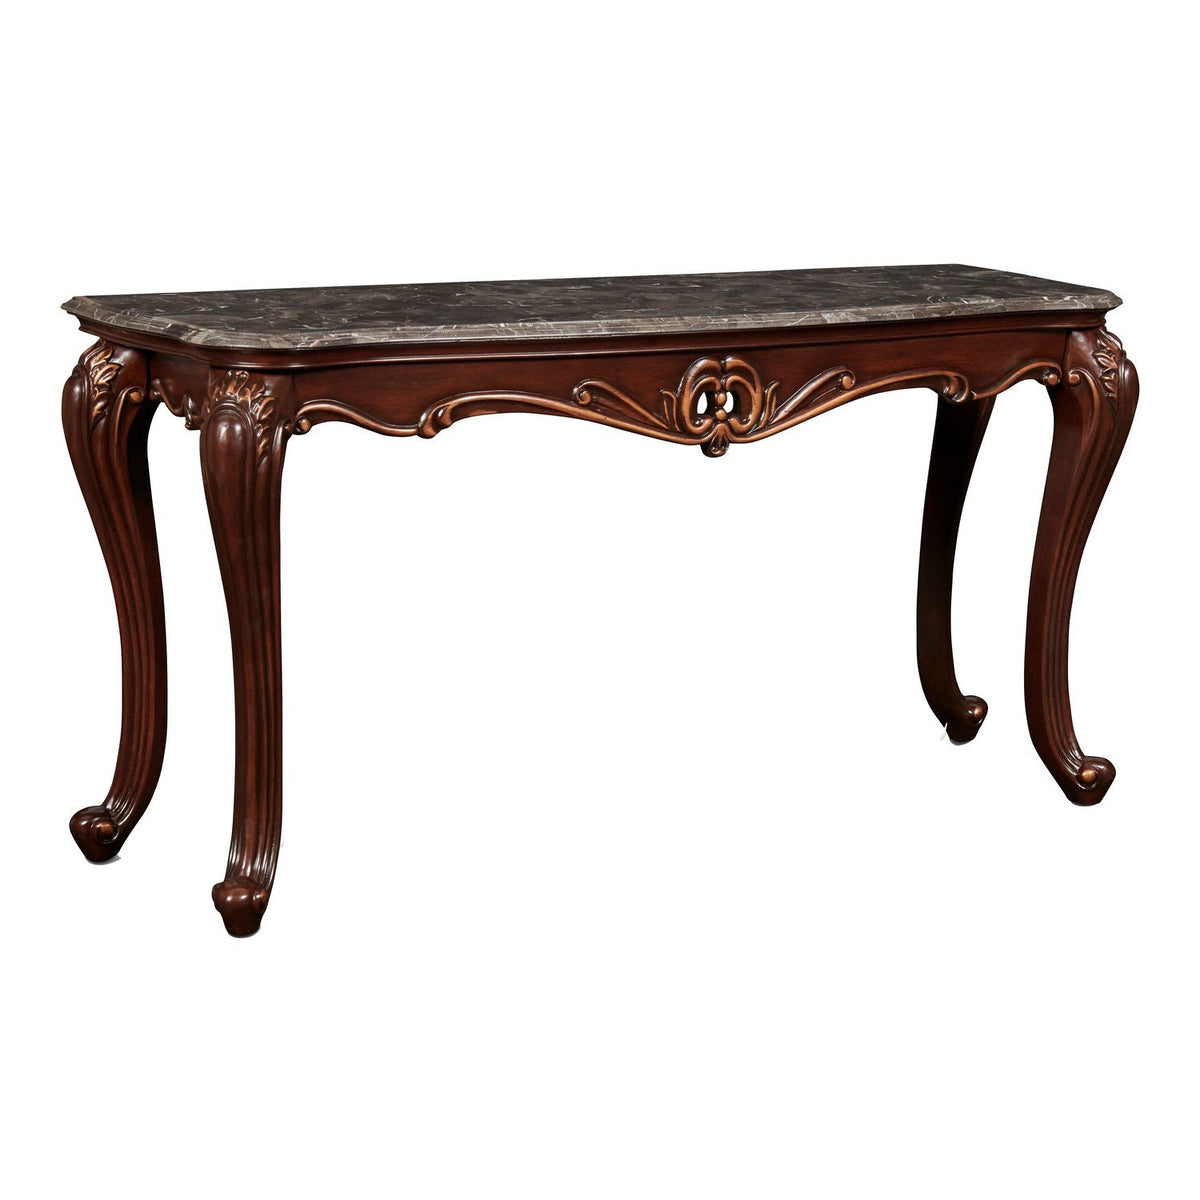 Wooden Console Table with Marble Top and Carved Details, Gray and Brown - BM218025